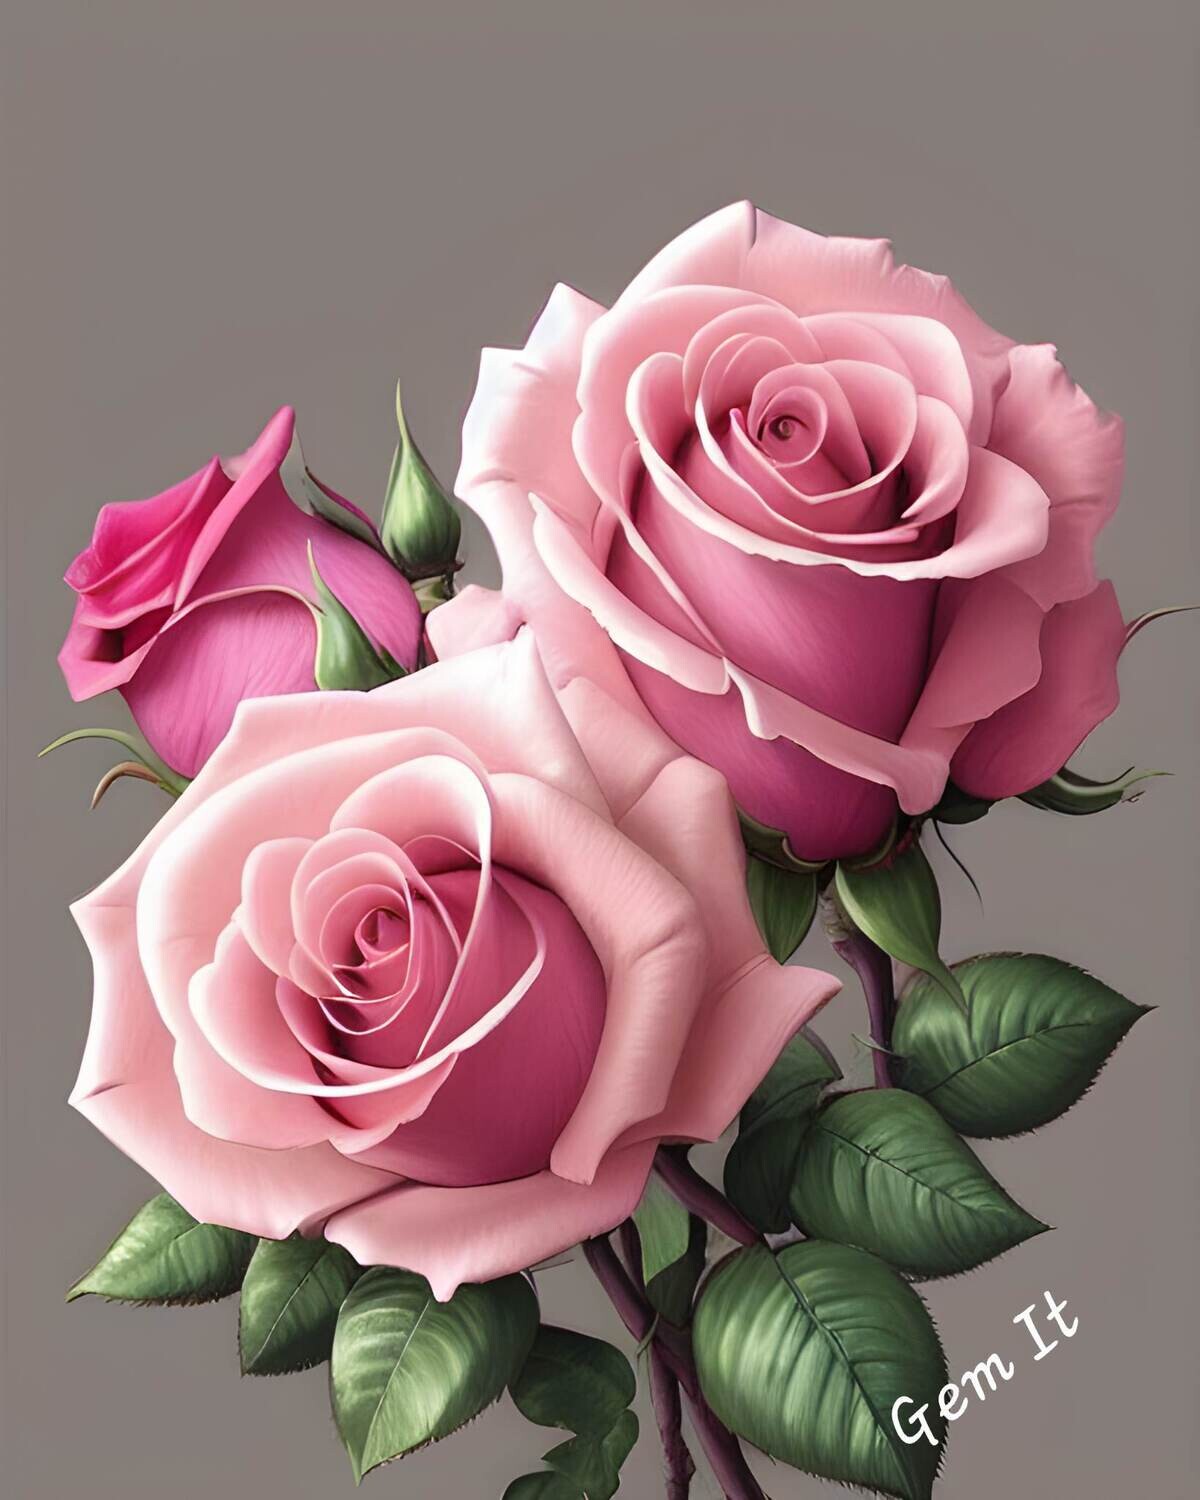 Roses Pink 3 - Specially ordered for you. Delivery is approximately 4 - 6 weeks.